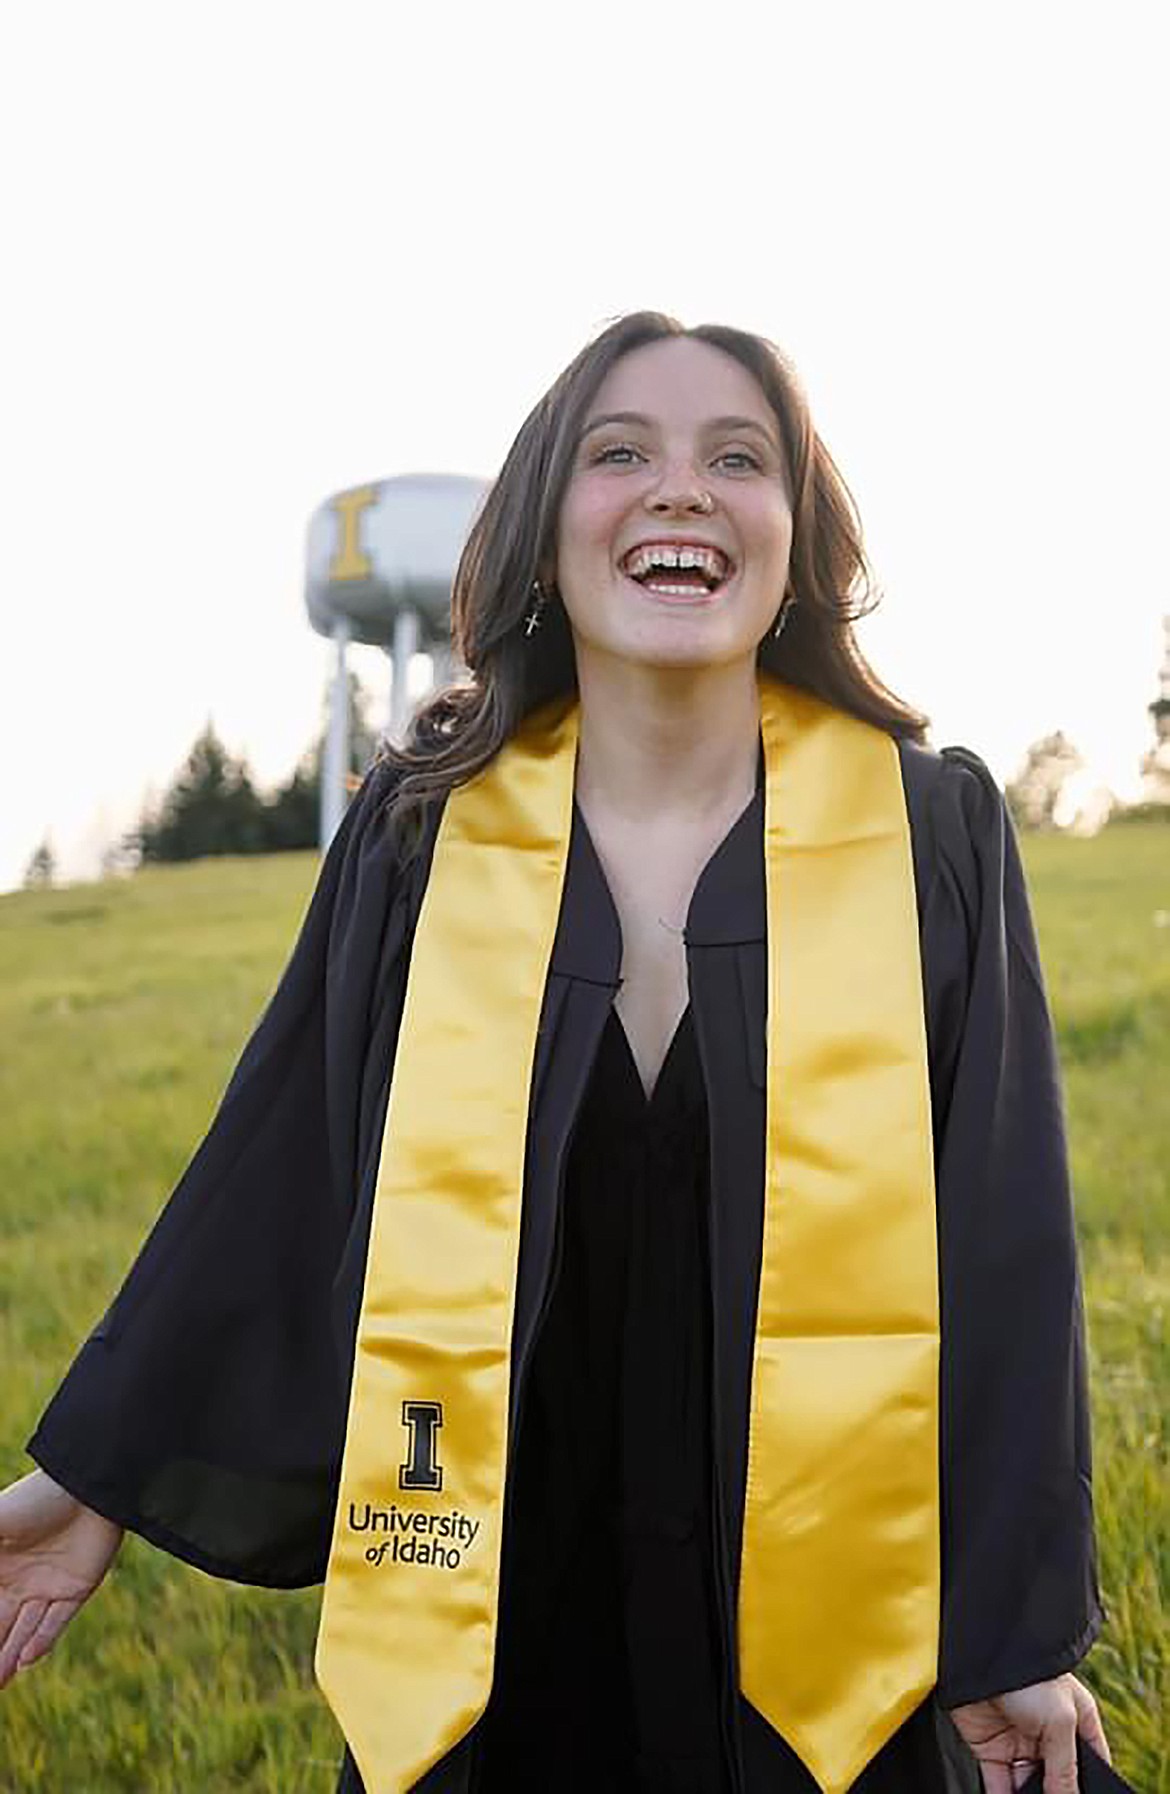 Emily Holbrook poses in her graduation garb after graduating the University of Idaho earlier this month.